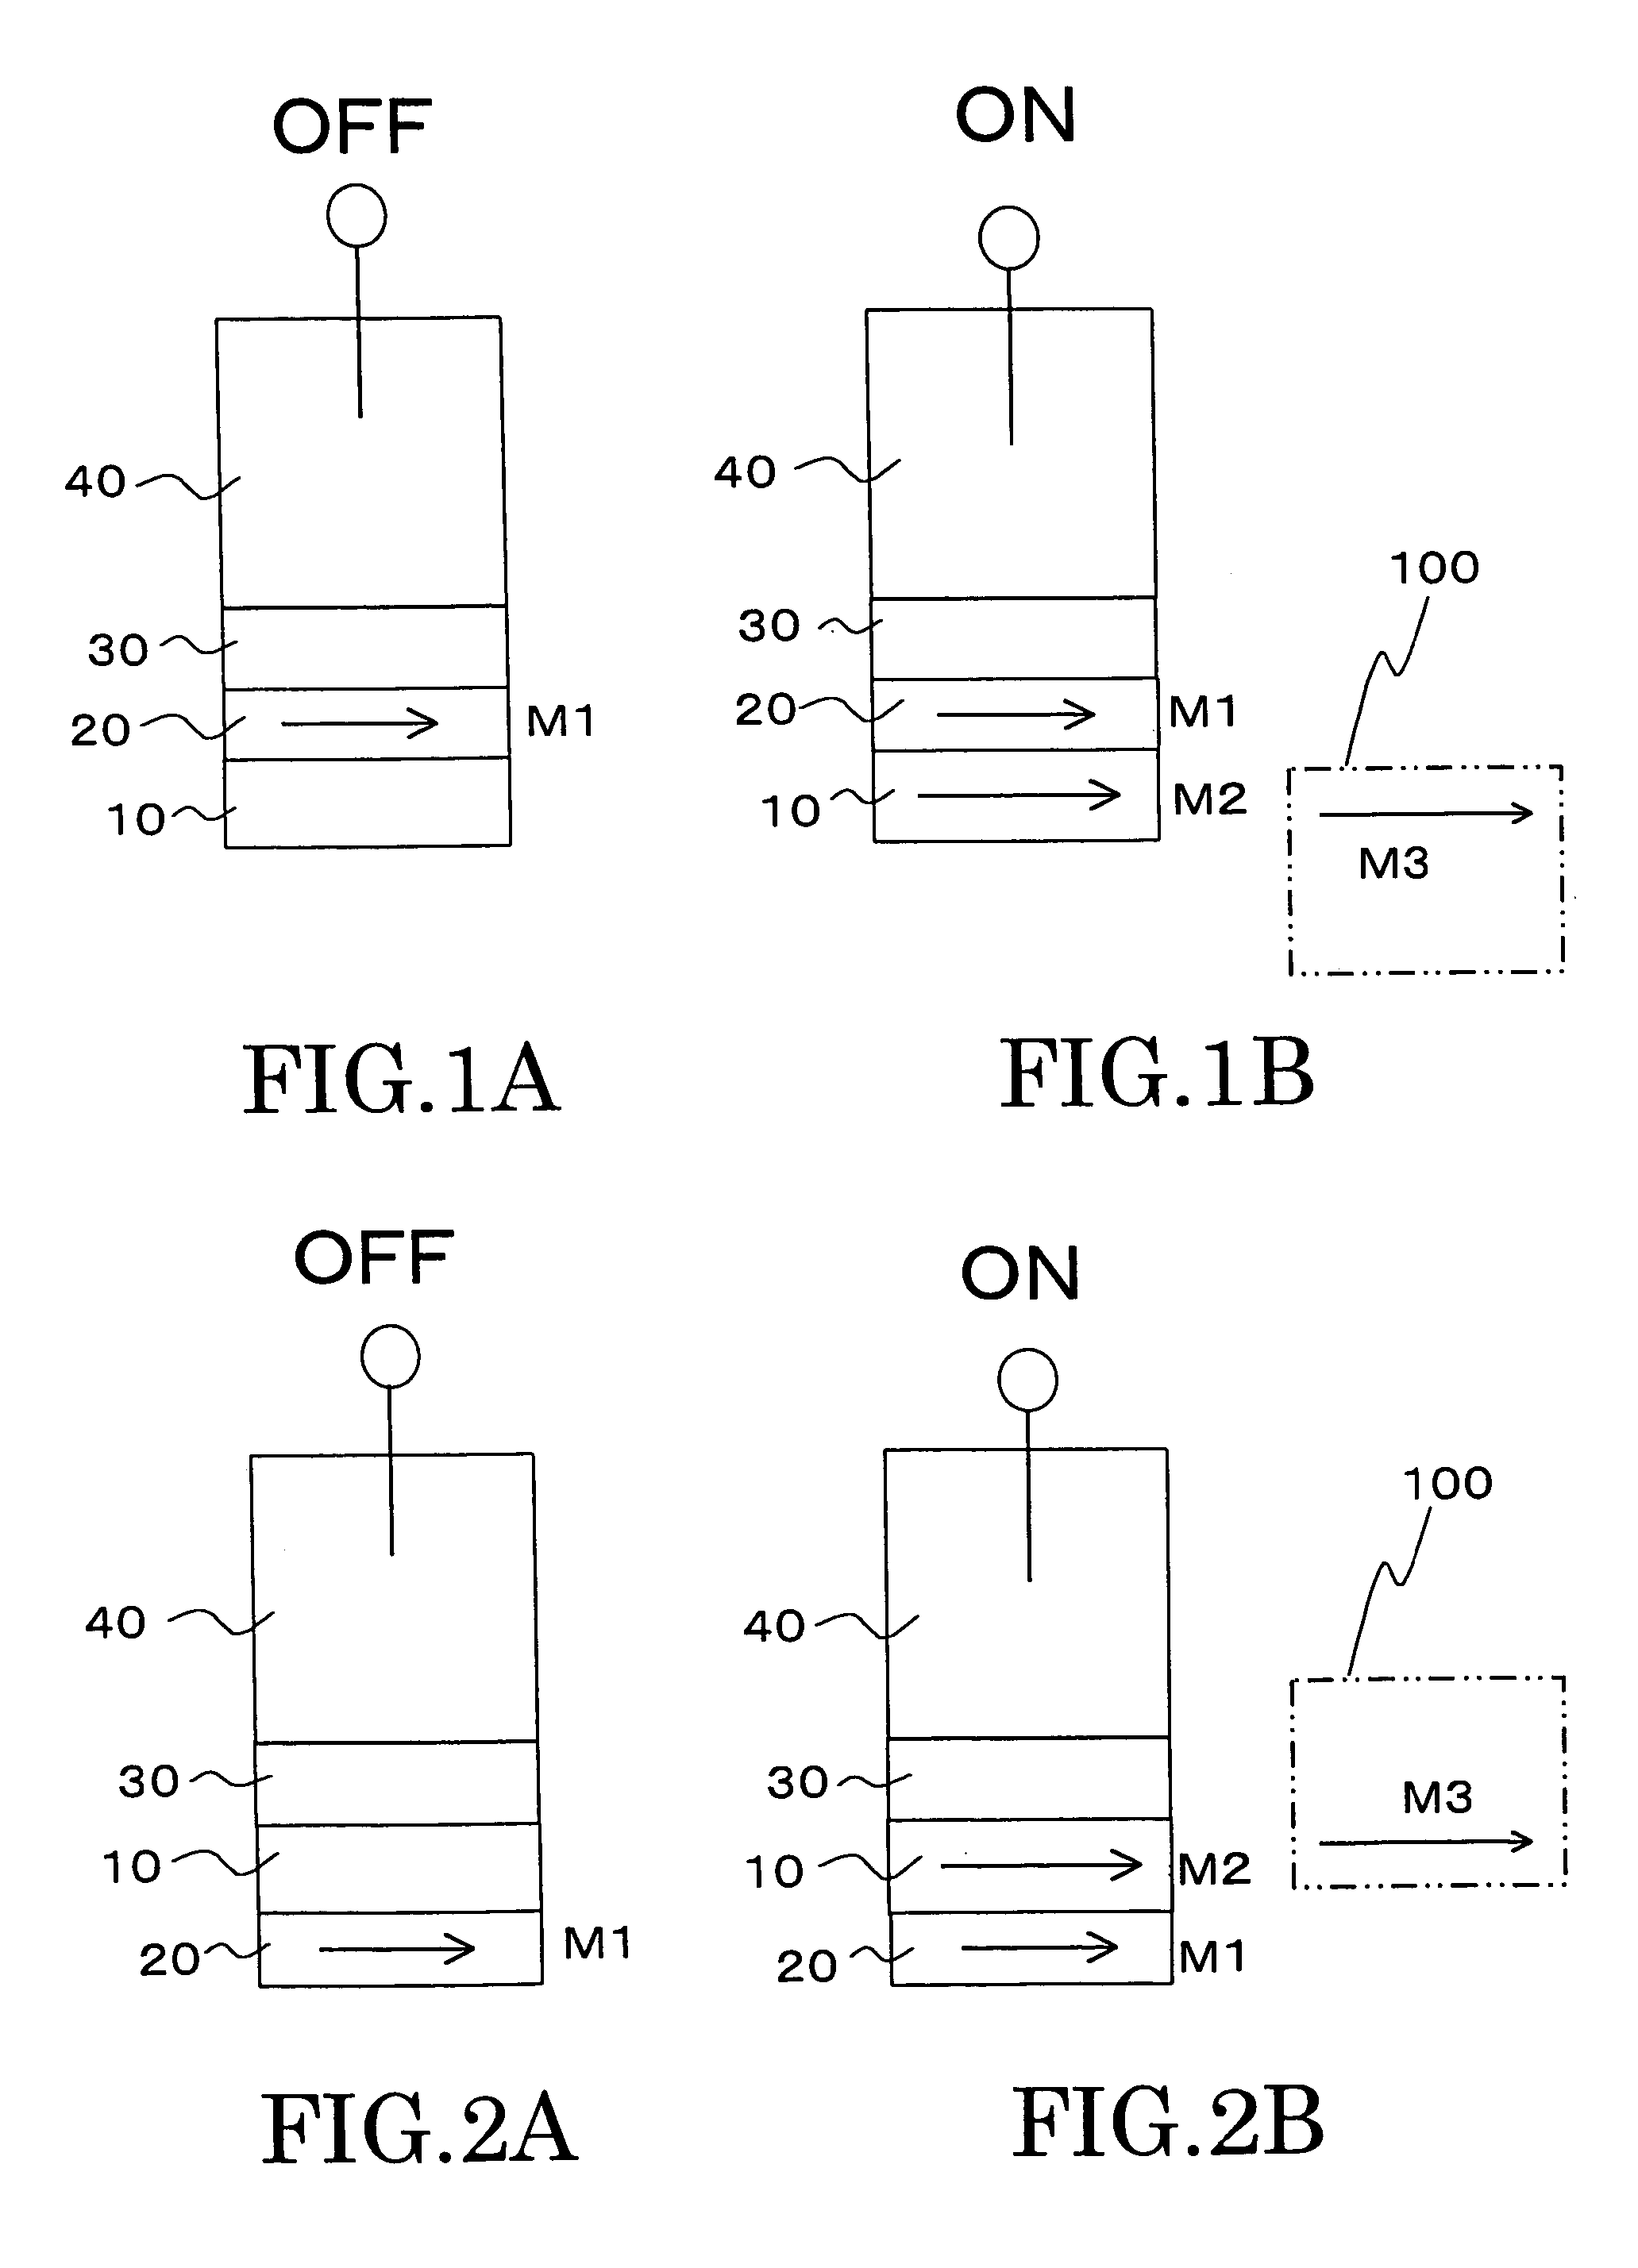 Multi-layer magnetic switching element comprising a magnetic semiconductor layer having magnetization induced by applied voltage